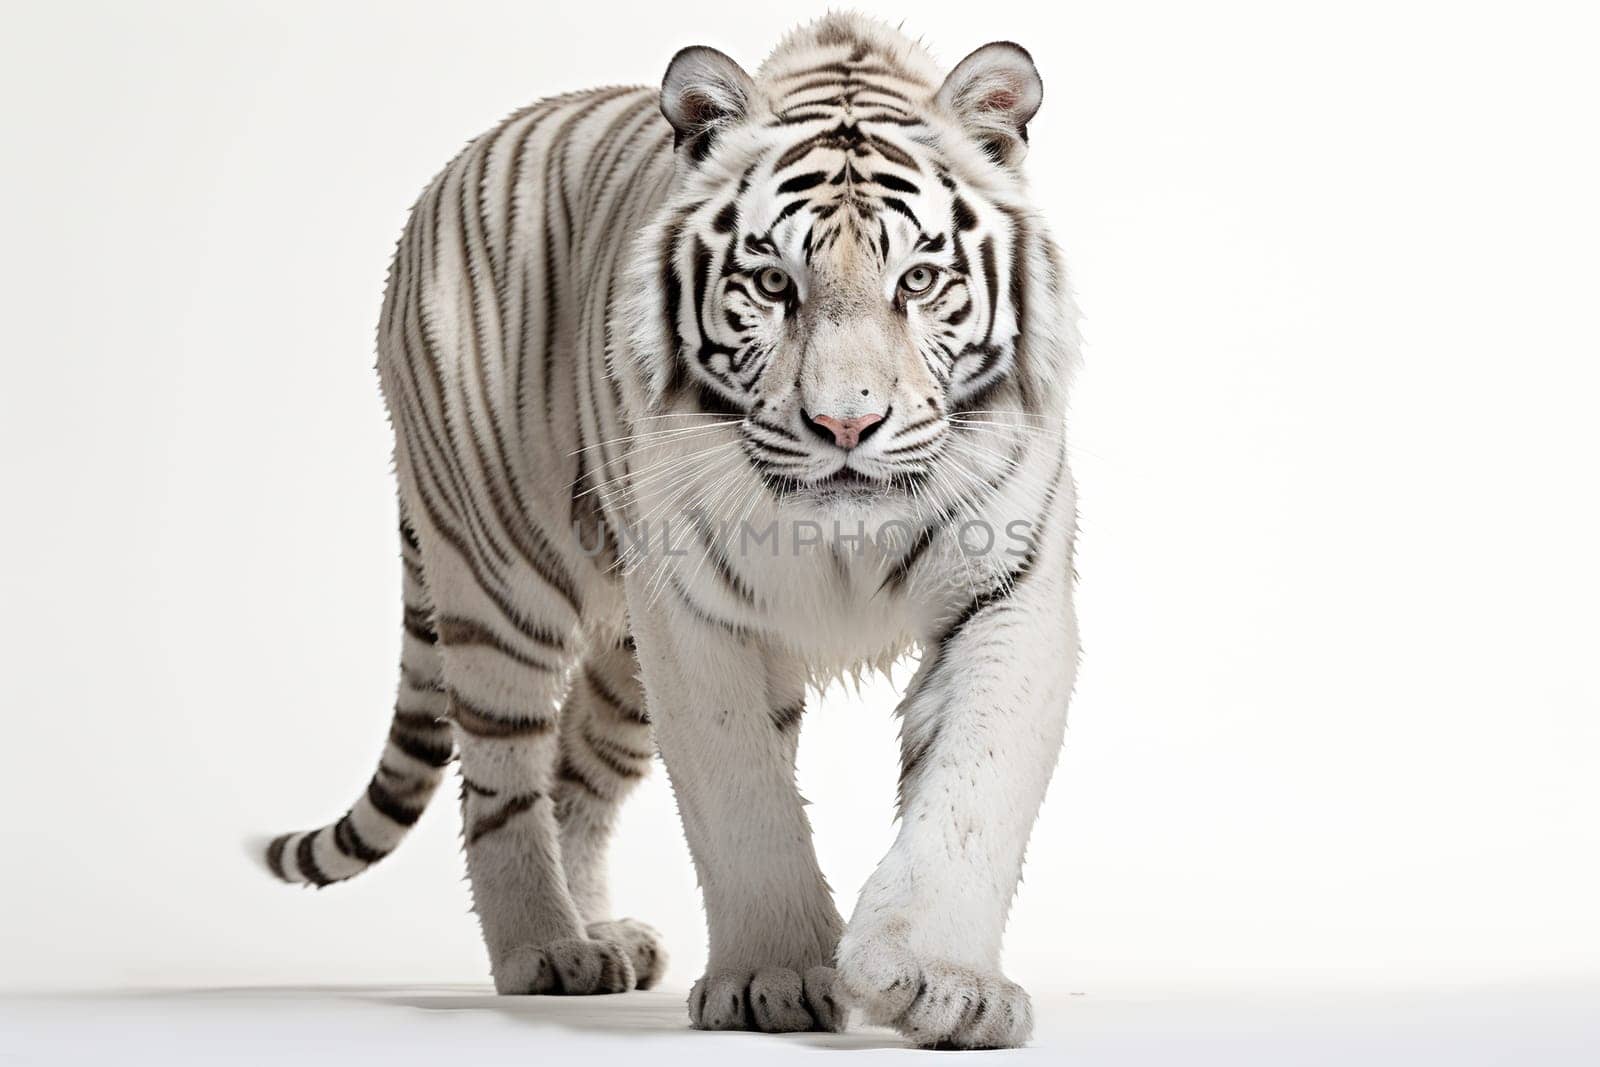 Adult white tiger with wet fur, isolated on a white background.